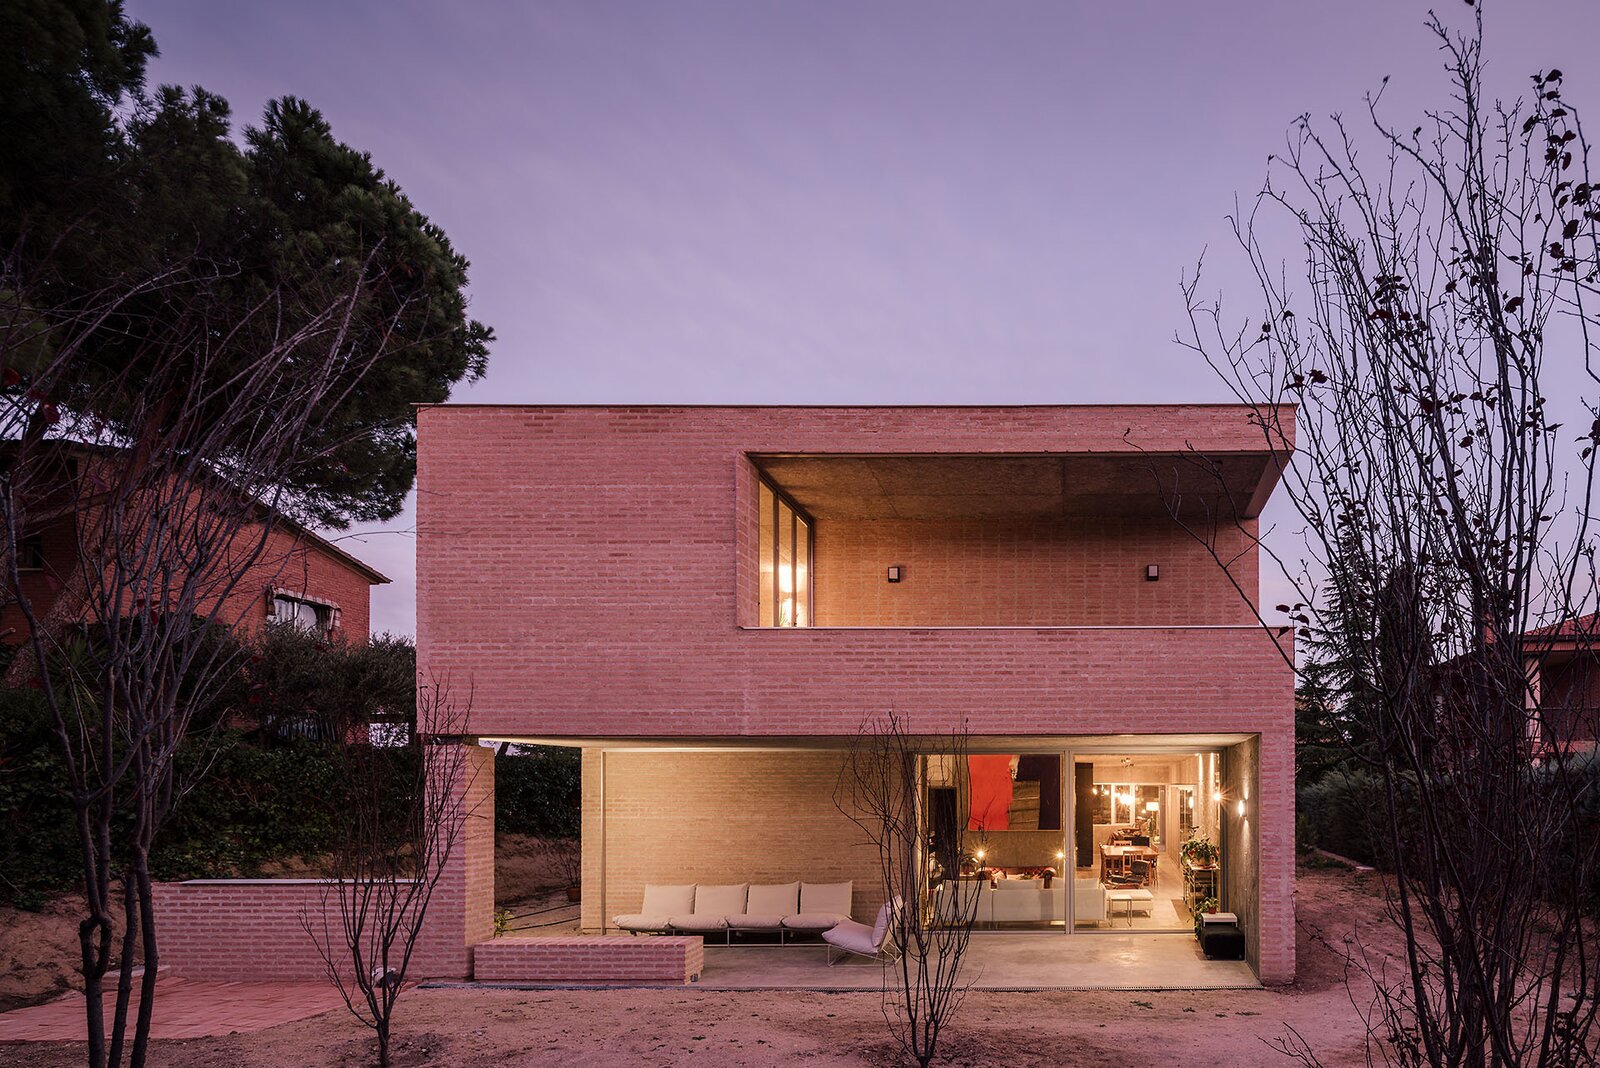 A Spanish Architect’s Brutalist-Inspired Home Makes Room for Three Generations